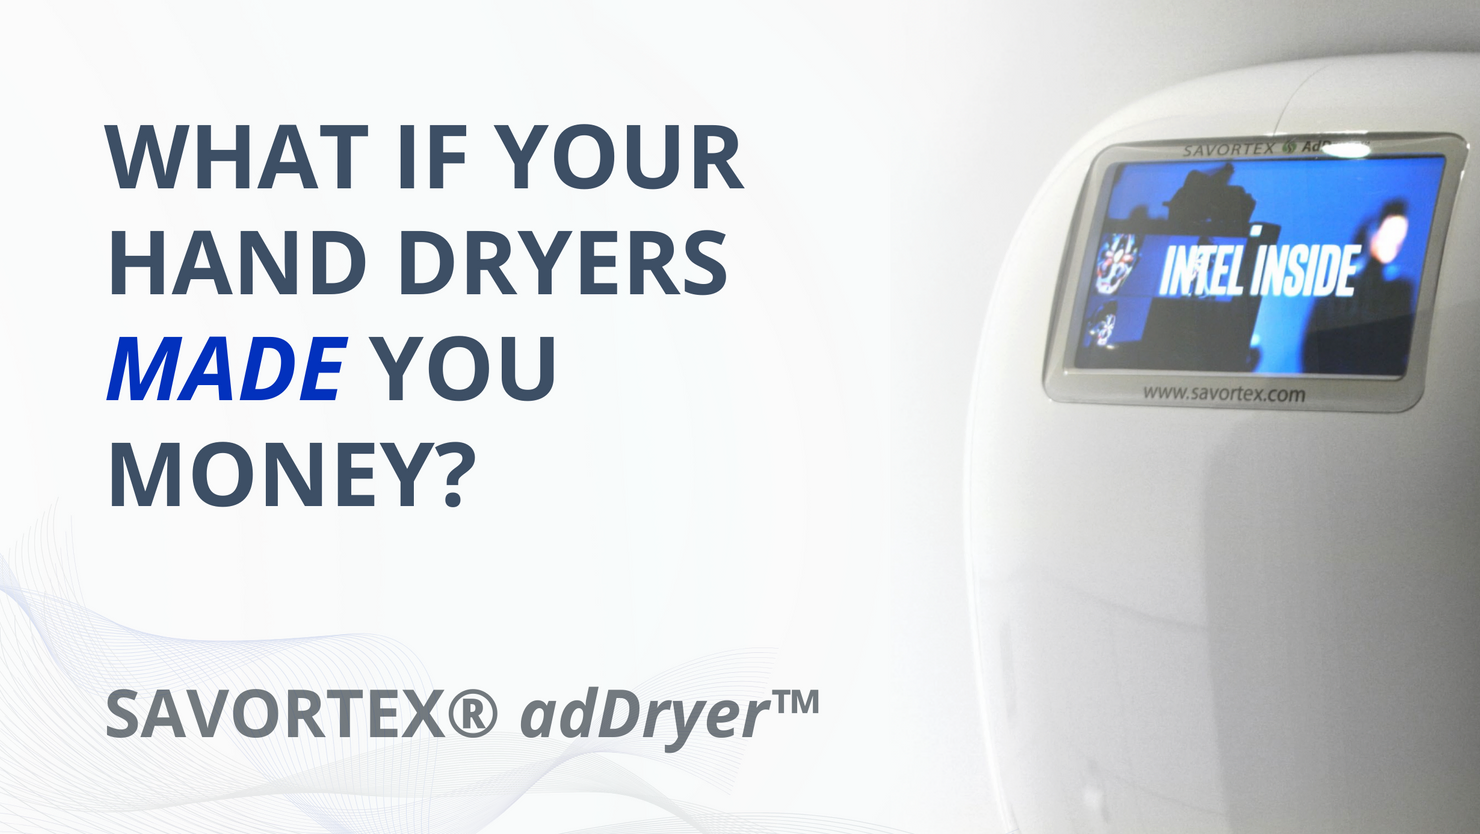 What if your hand dryers made you money?